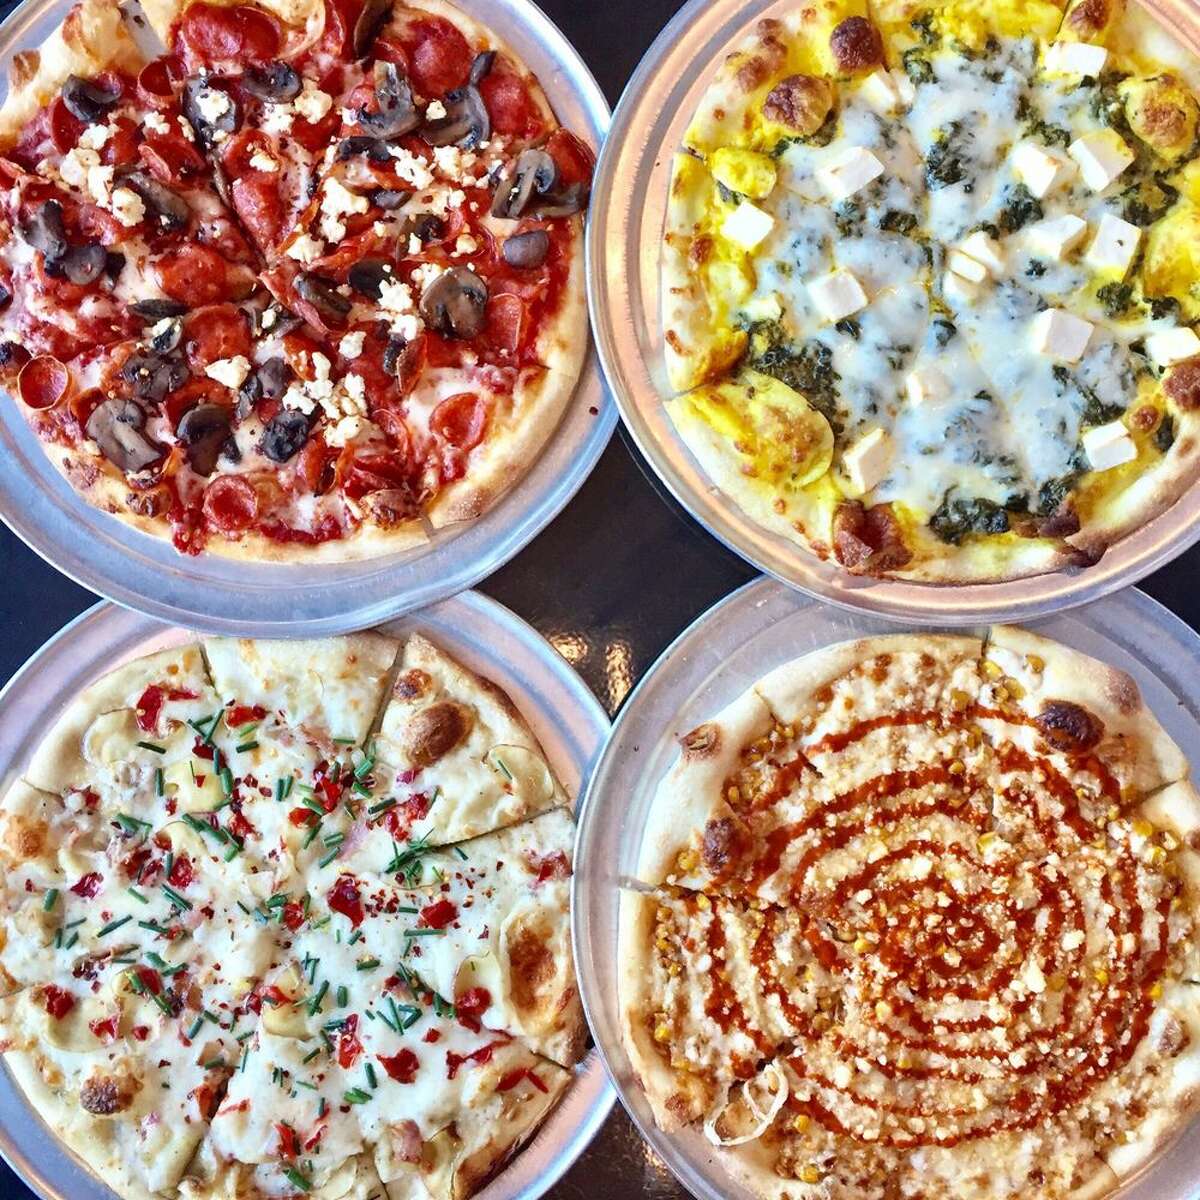 Pi Pizza at 181 Heights Blvd. is set to serve its last pie, according to a Friday release.  The casual spot officially closes at 11 p.m. on Friday, Feb. 21, 2020. The restaurant has been serving inventive pizzas, sandwiches, frozen cocktails and ice cream since 2016.